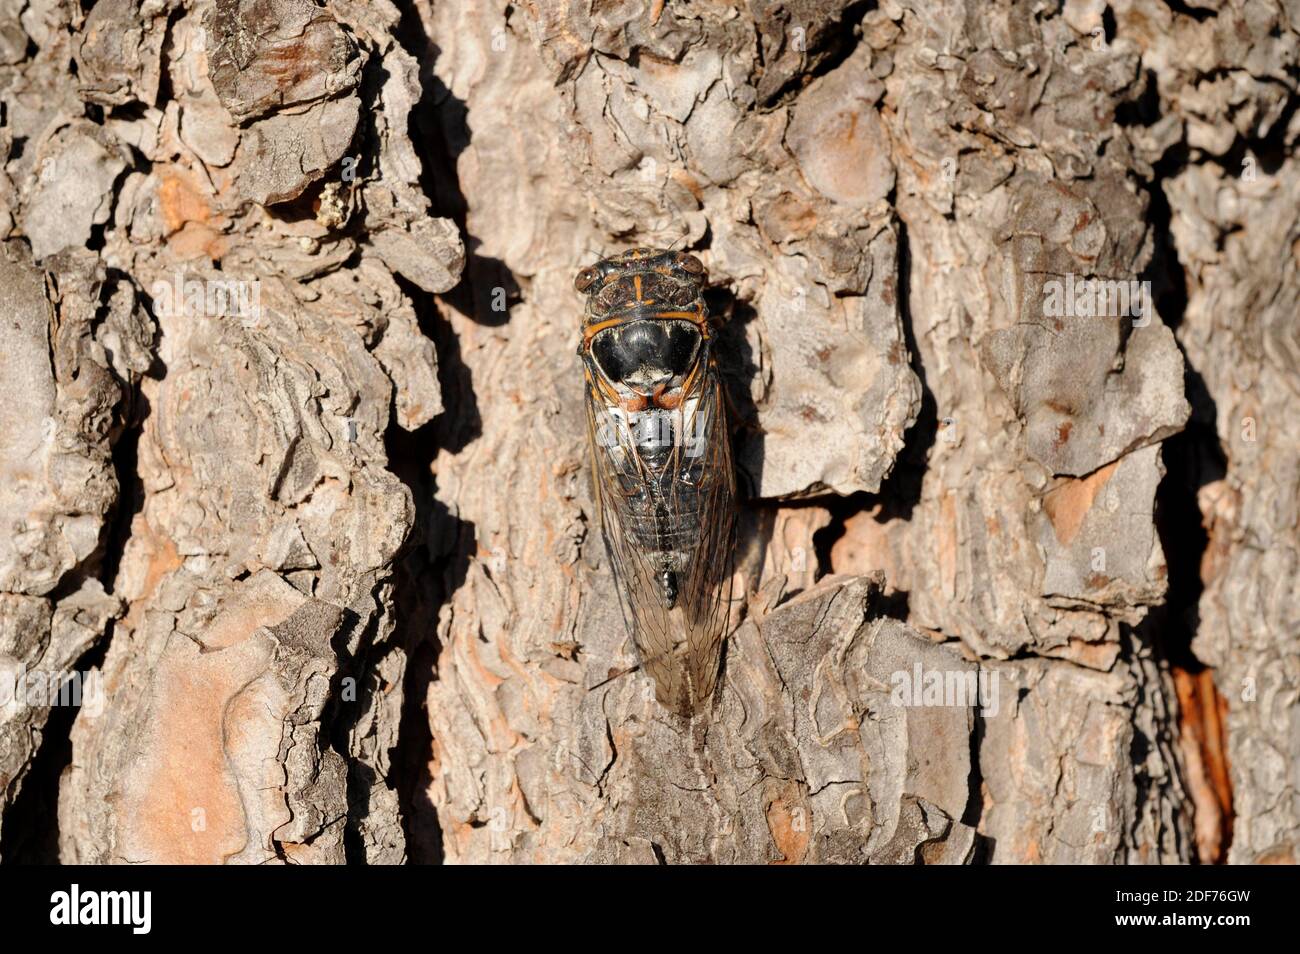 Cicada (Cicada orni) is an hemiptera insect. This photo was taken near Salses, France. Stock Photo